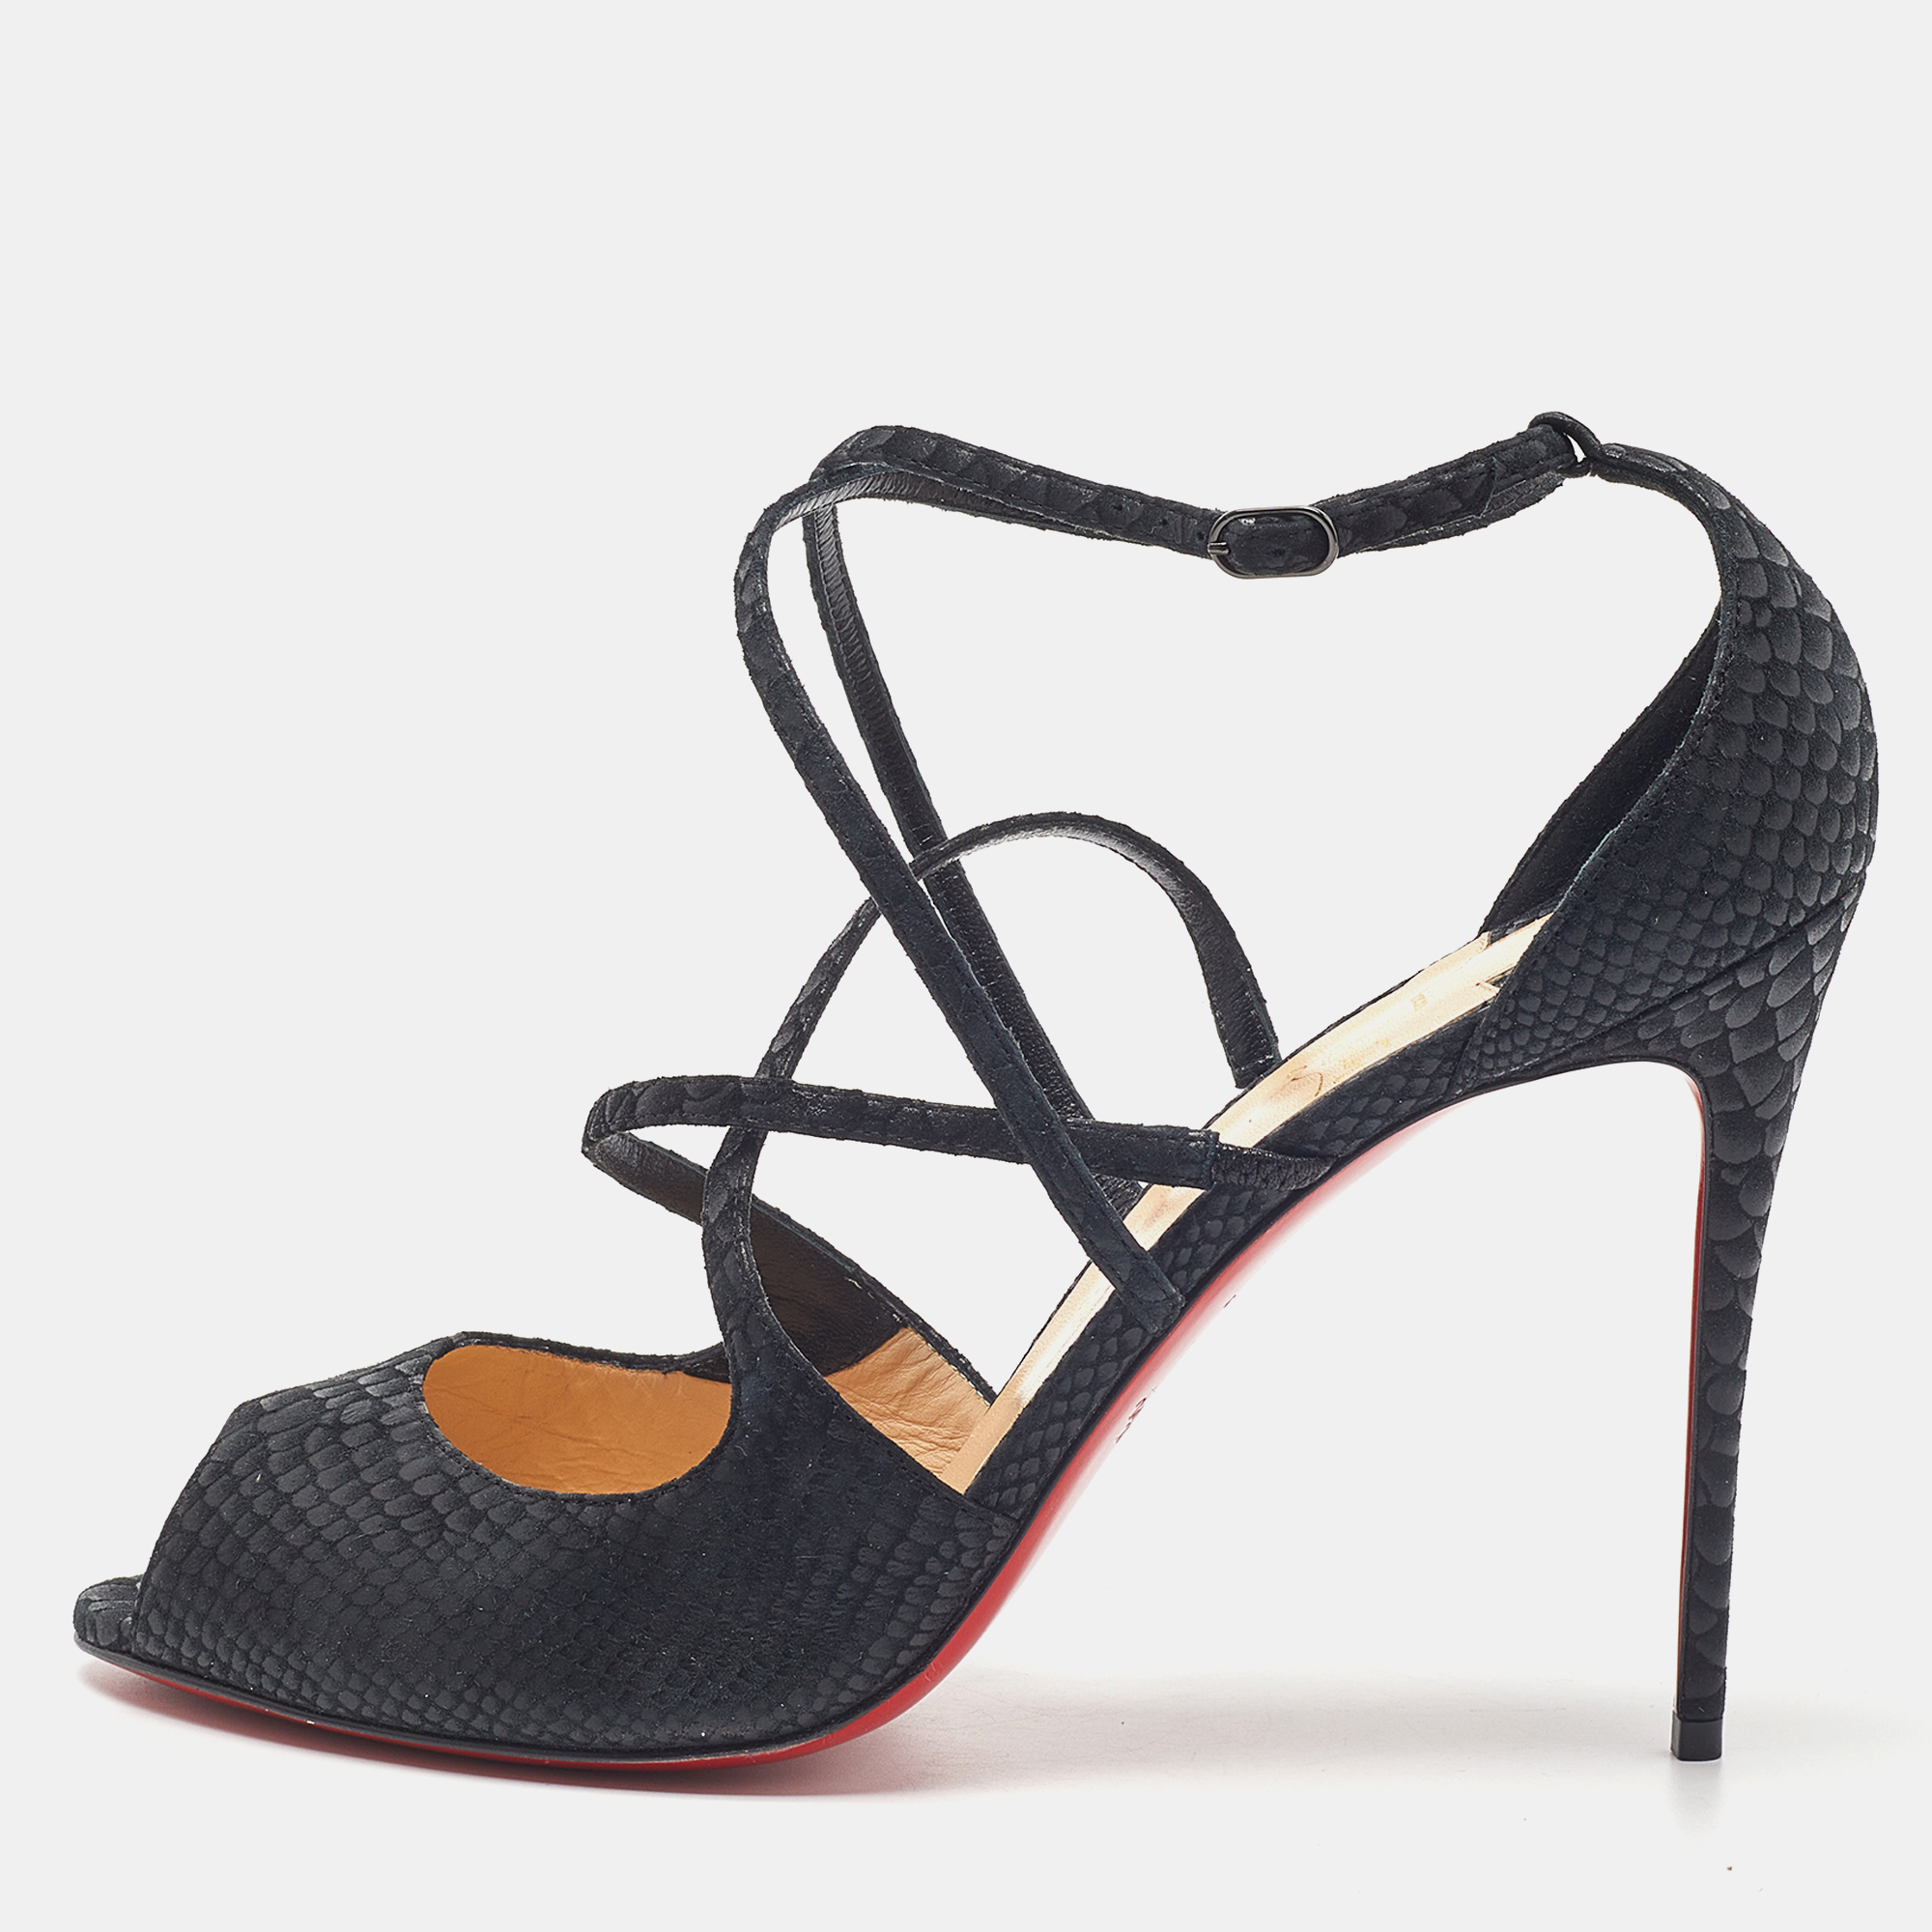 Christian Louboutin Black Embossed Snakeskin Leather Strappy Sandals Size 42